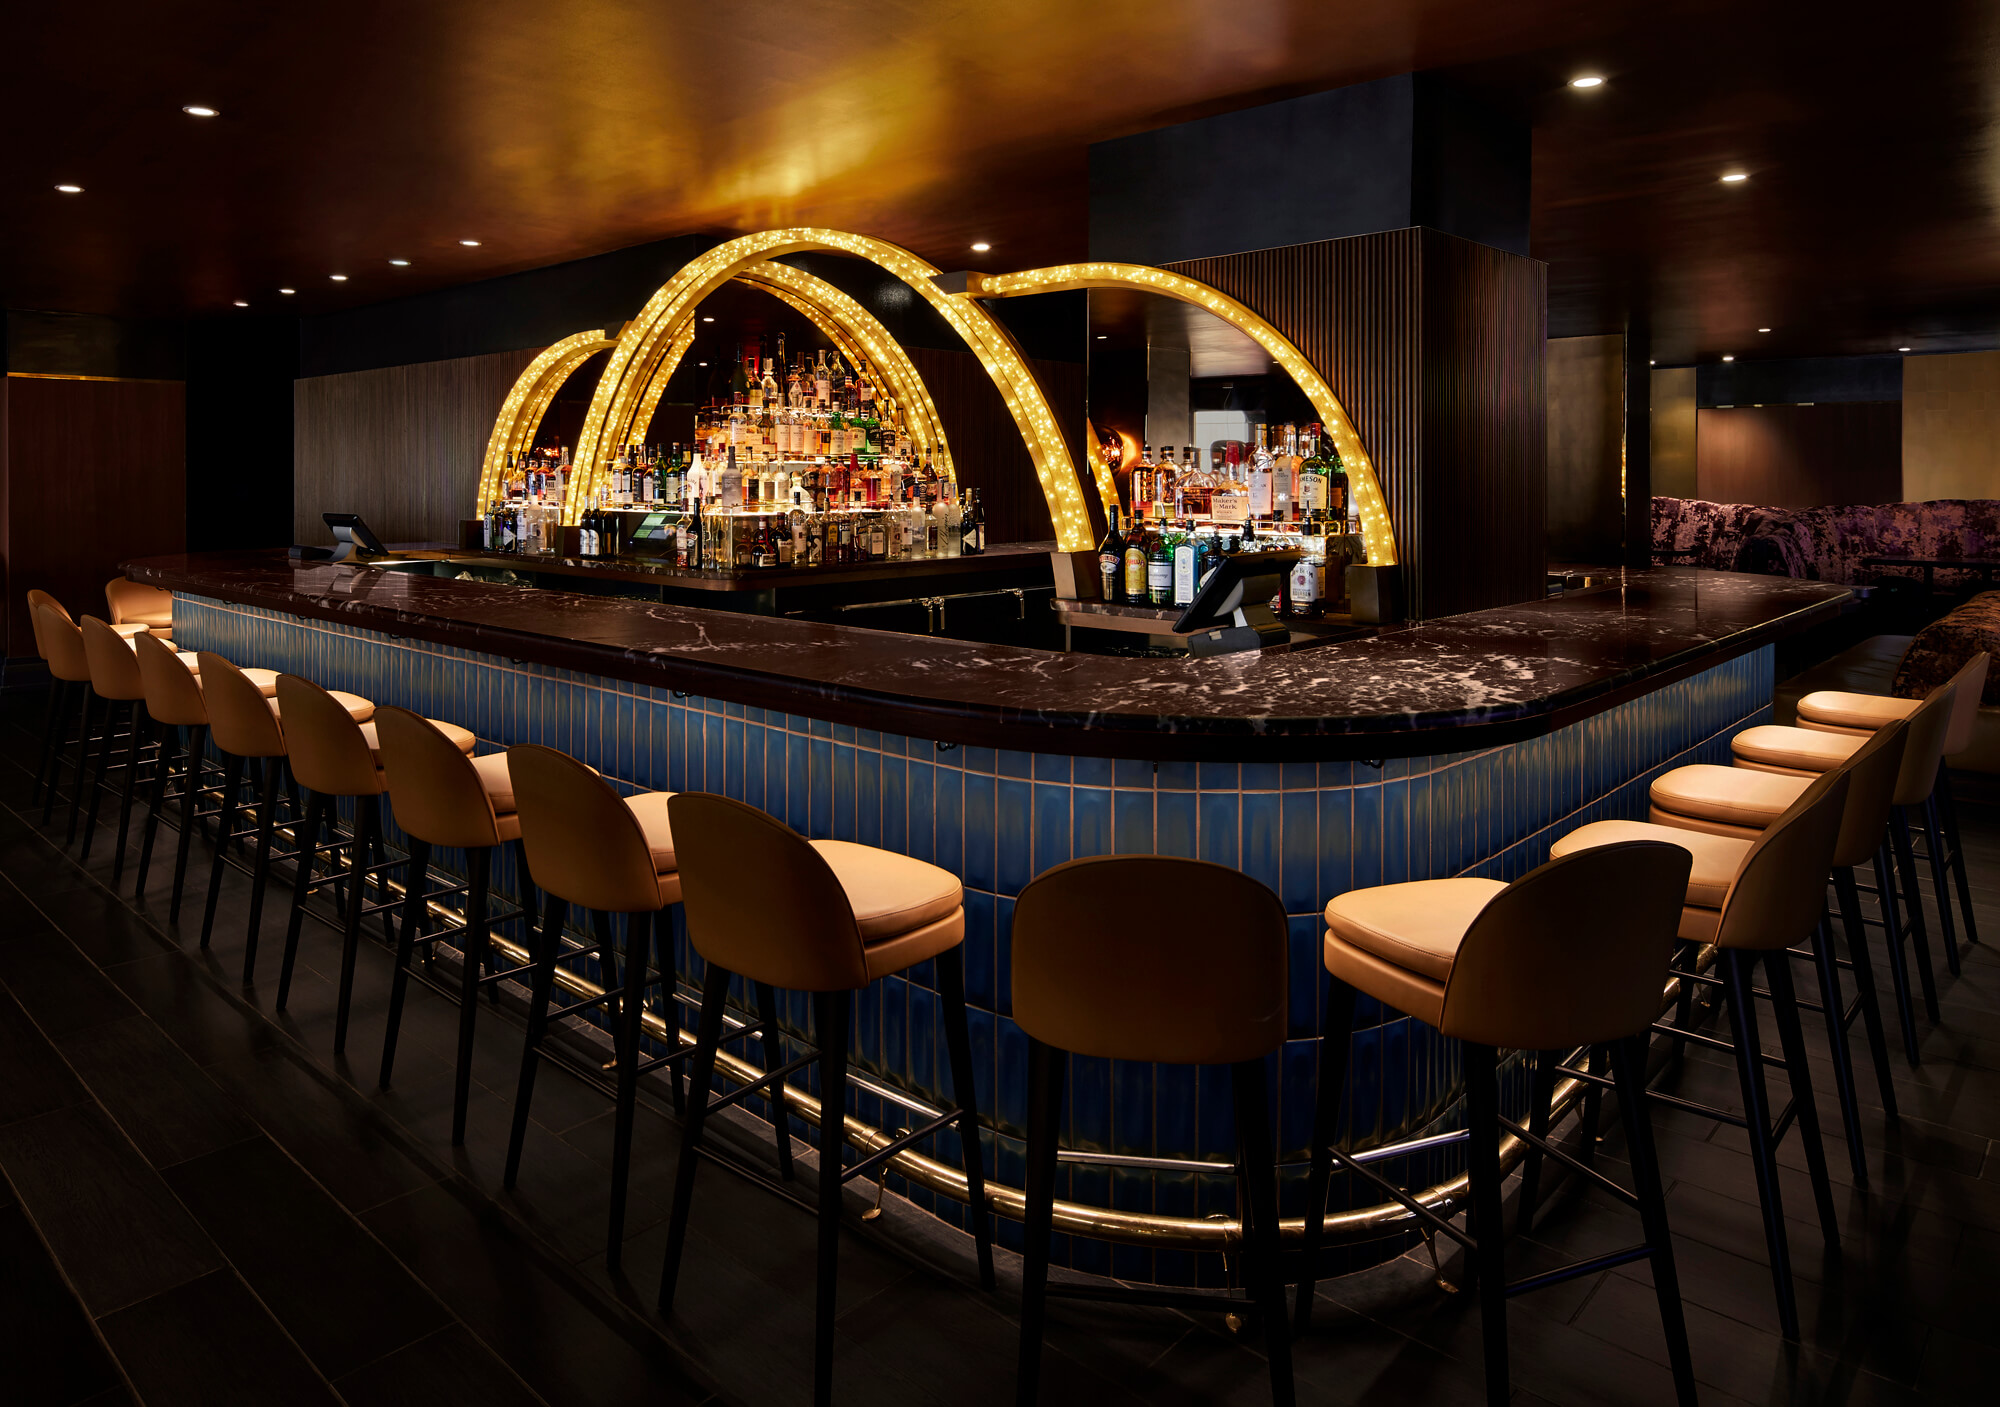 The Stayton Room bar at The Lexington Hotel in New York